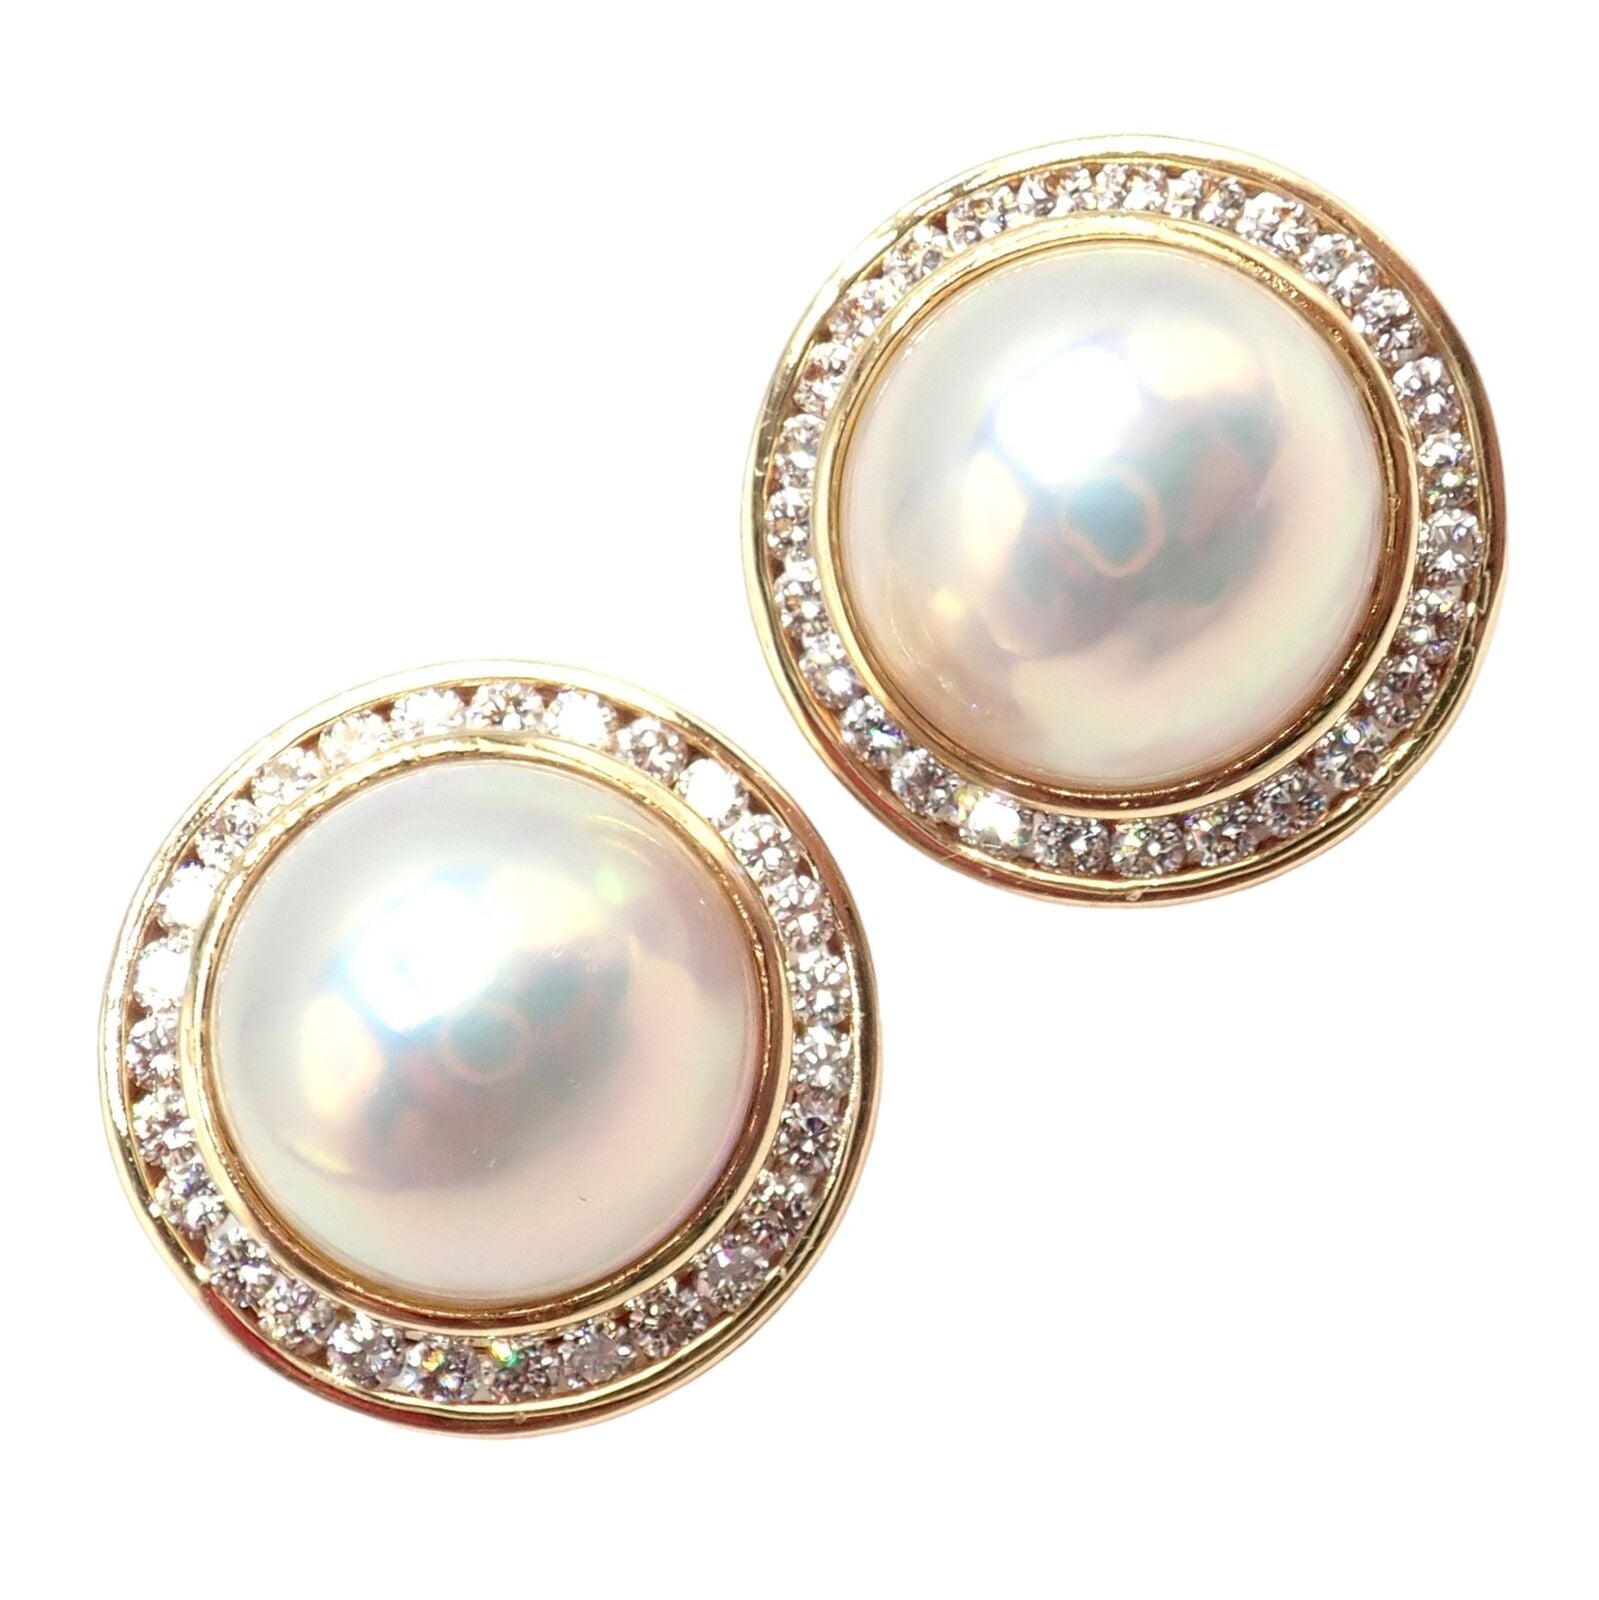 Tiffany & Co. Jewelry & Watches:Fine Jewelry:Earrings Authentic Tiffany & Co 18k Yellow Gold Diamond Mabe Pearl Earrings